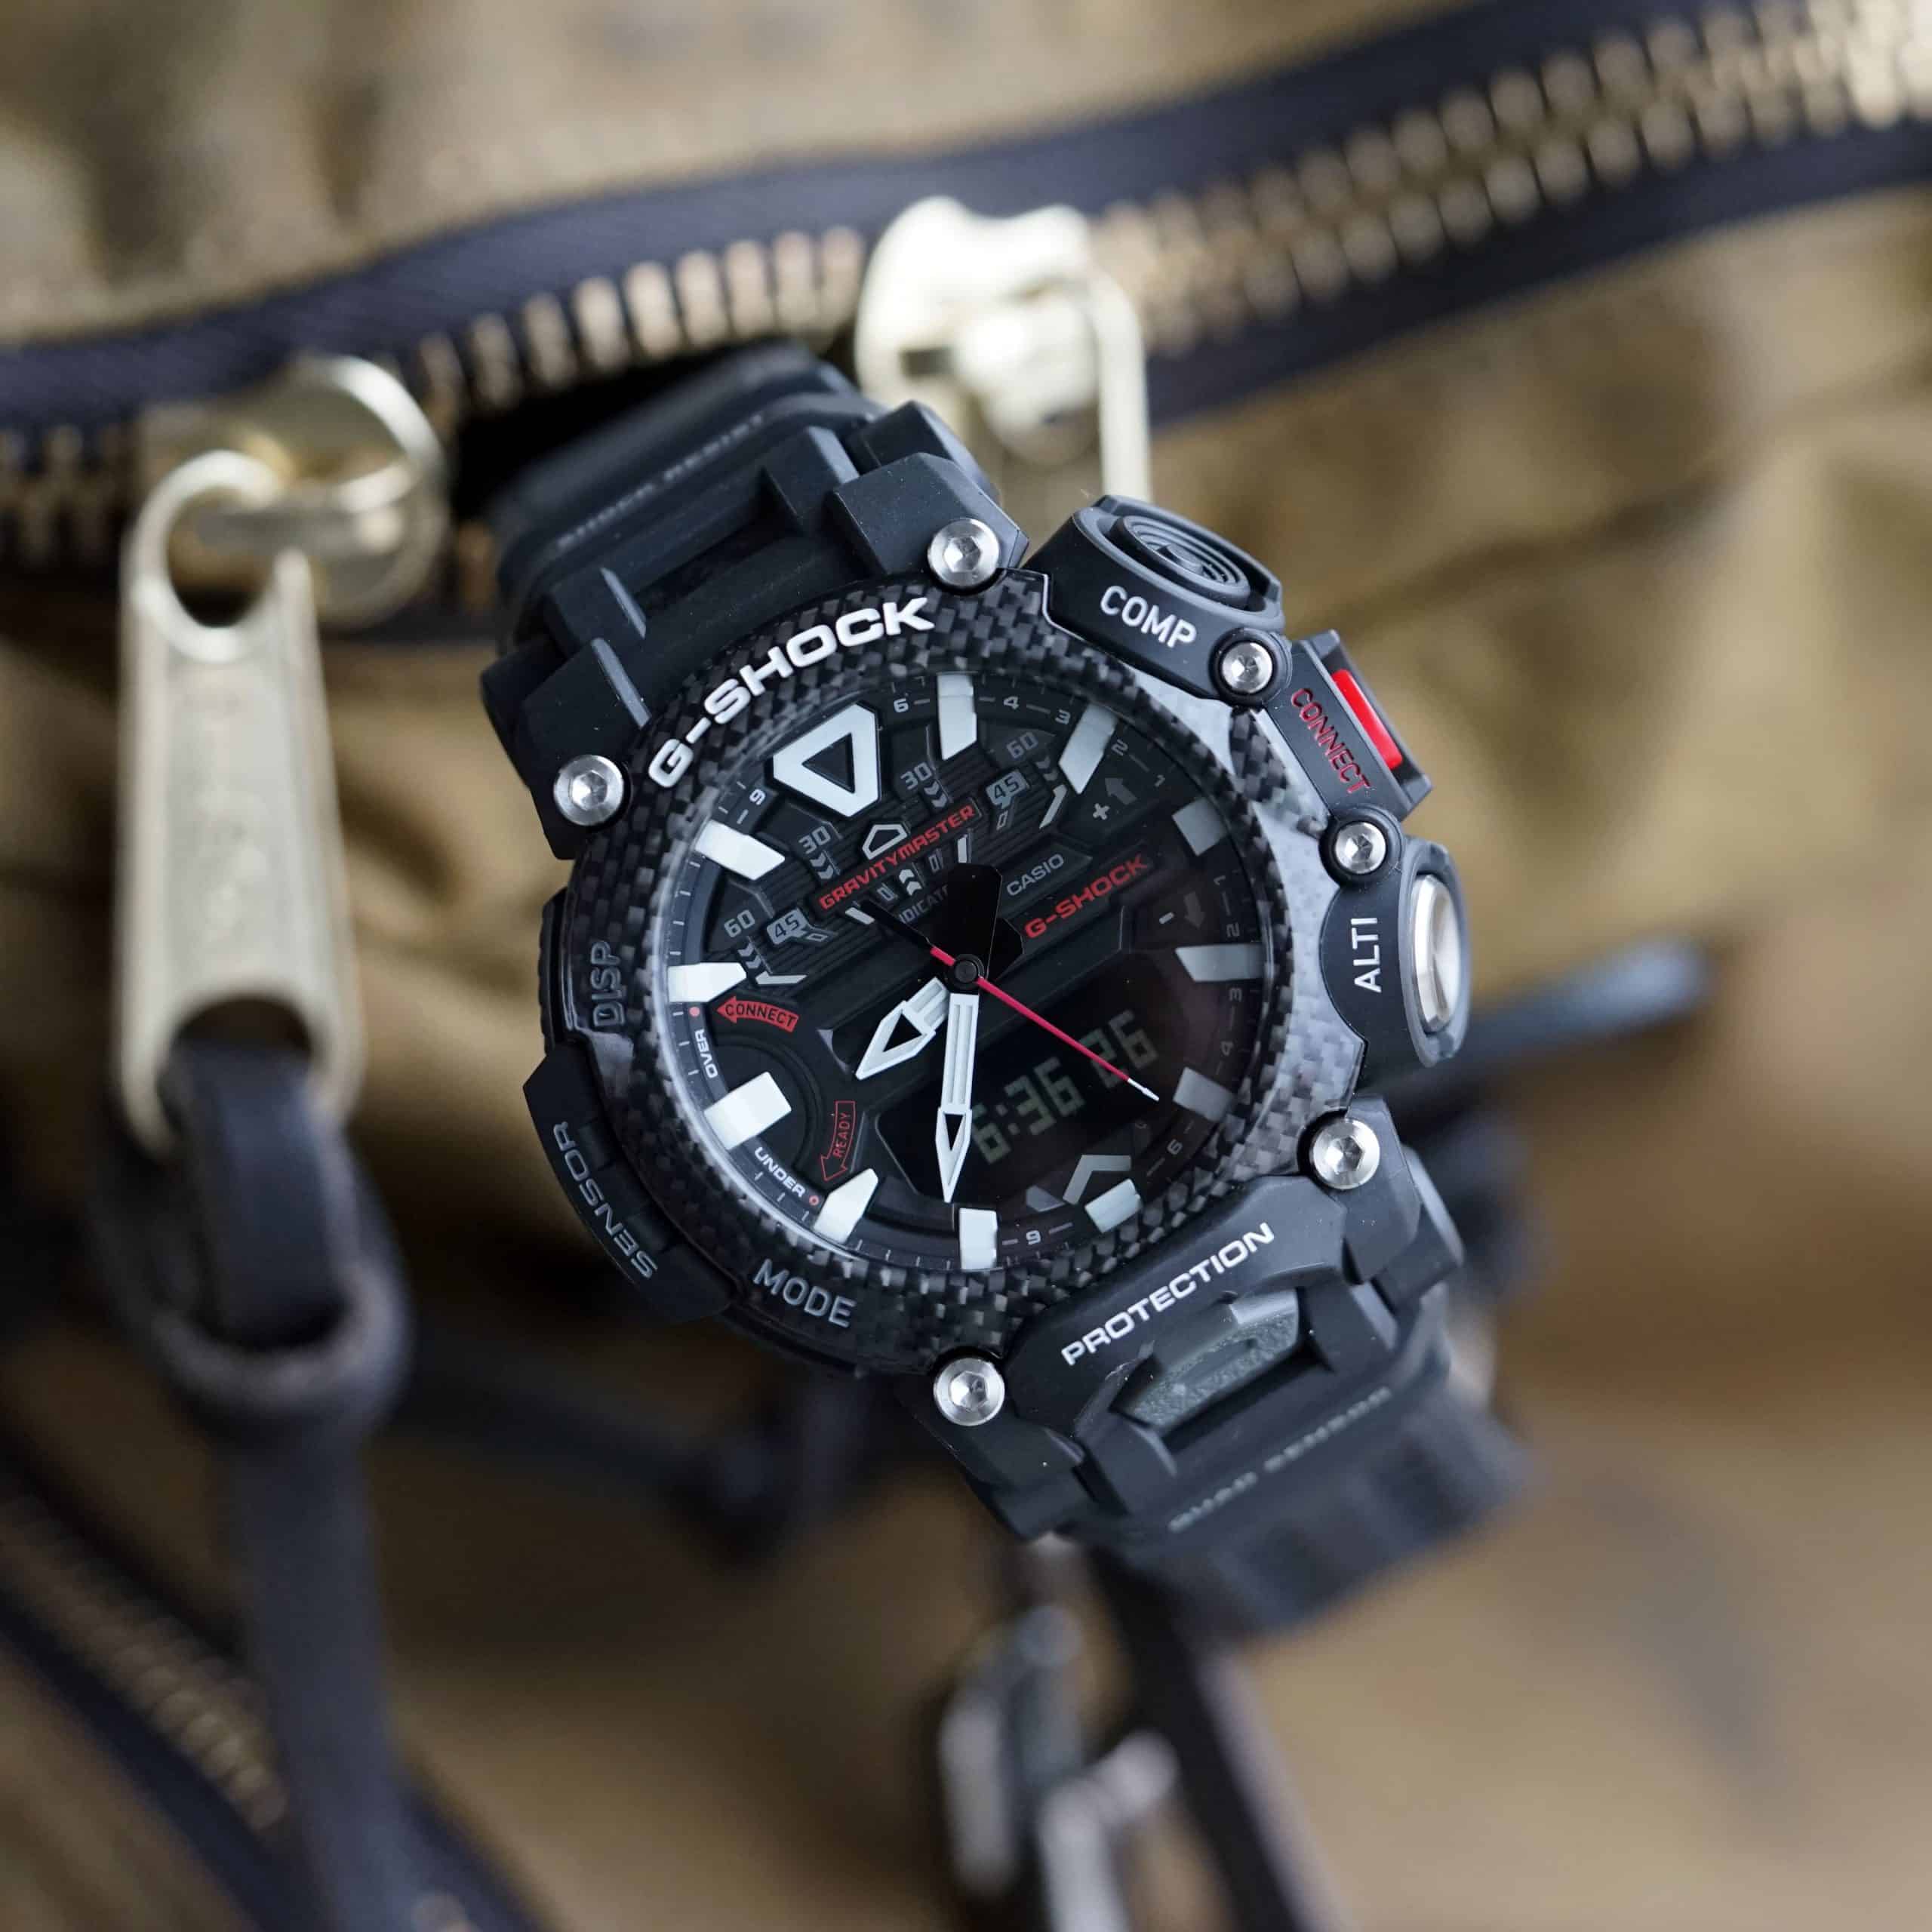 Defying gravity with the new G-Shock Gravitymaster GR-B200-1AER